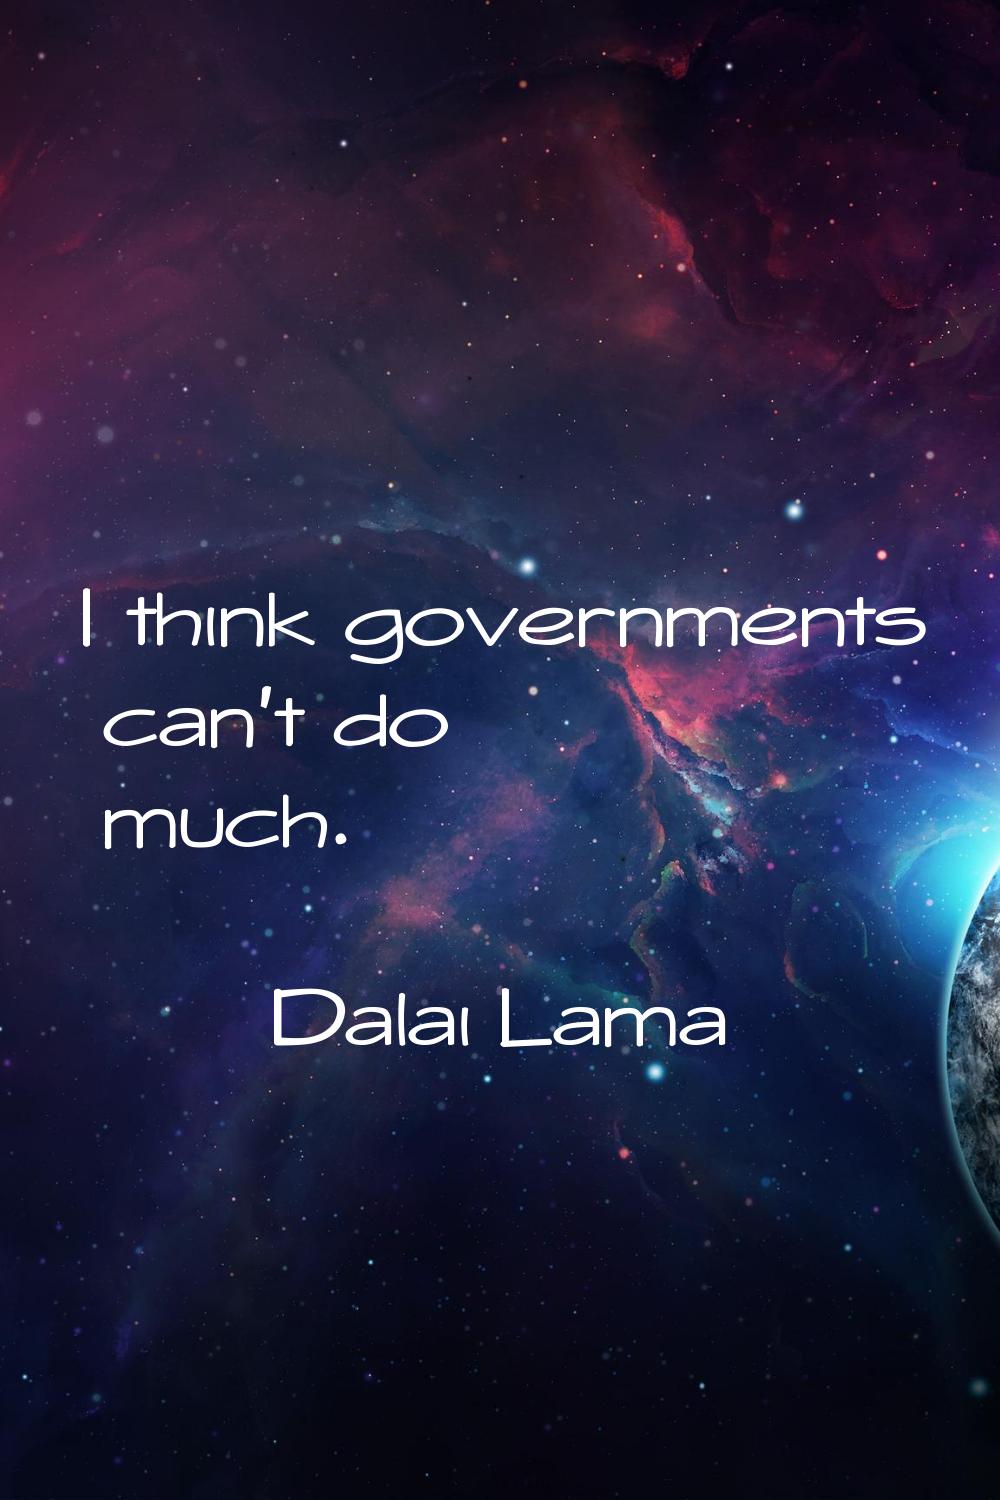 I think governments can't do much.